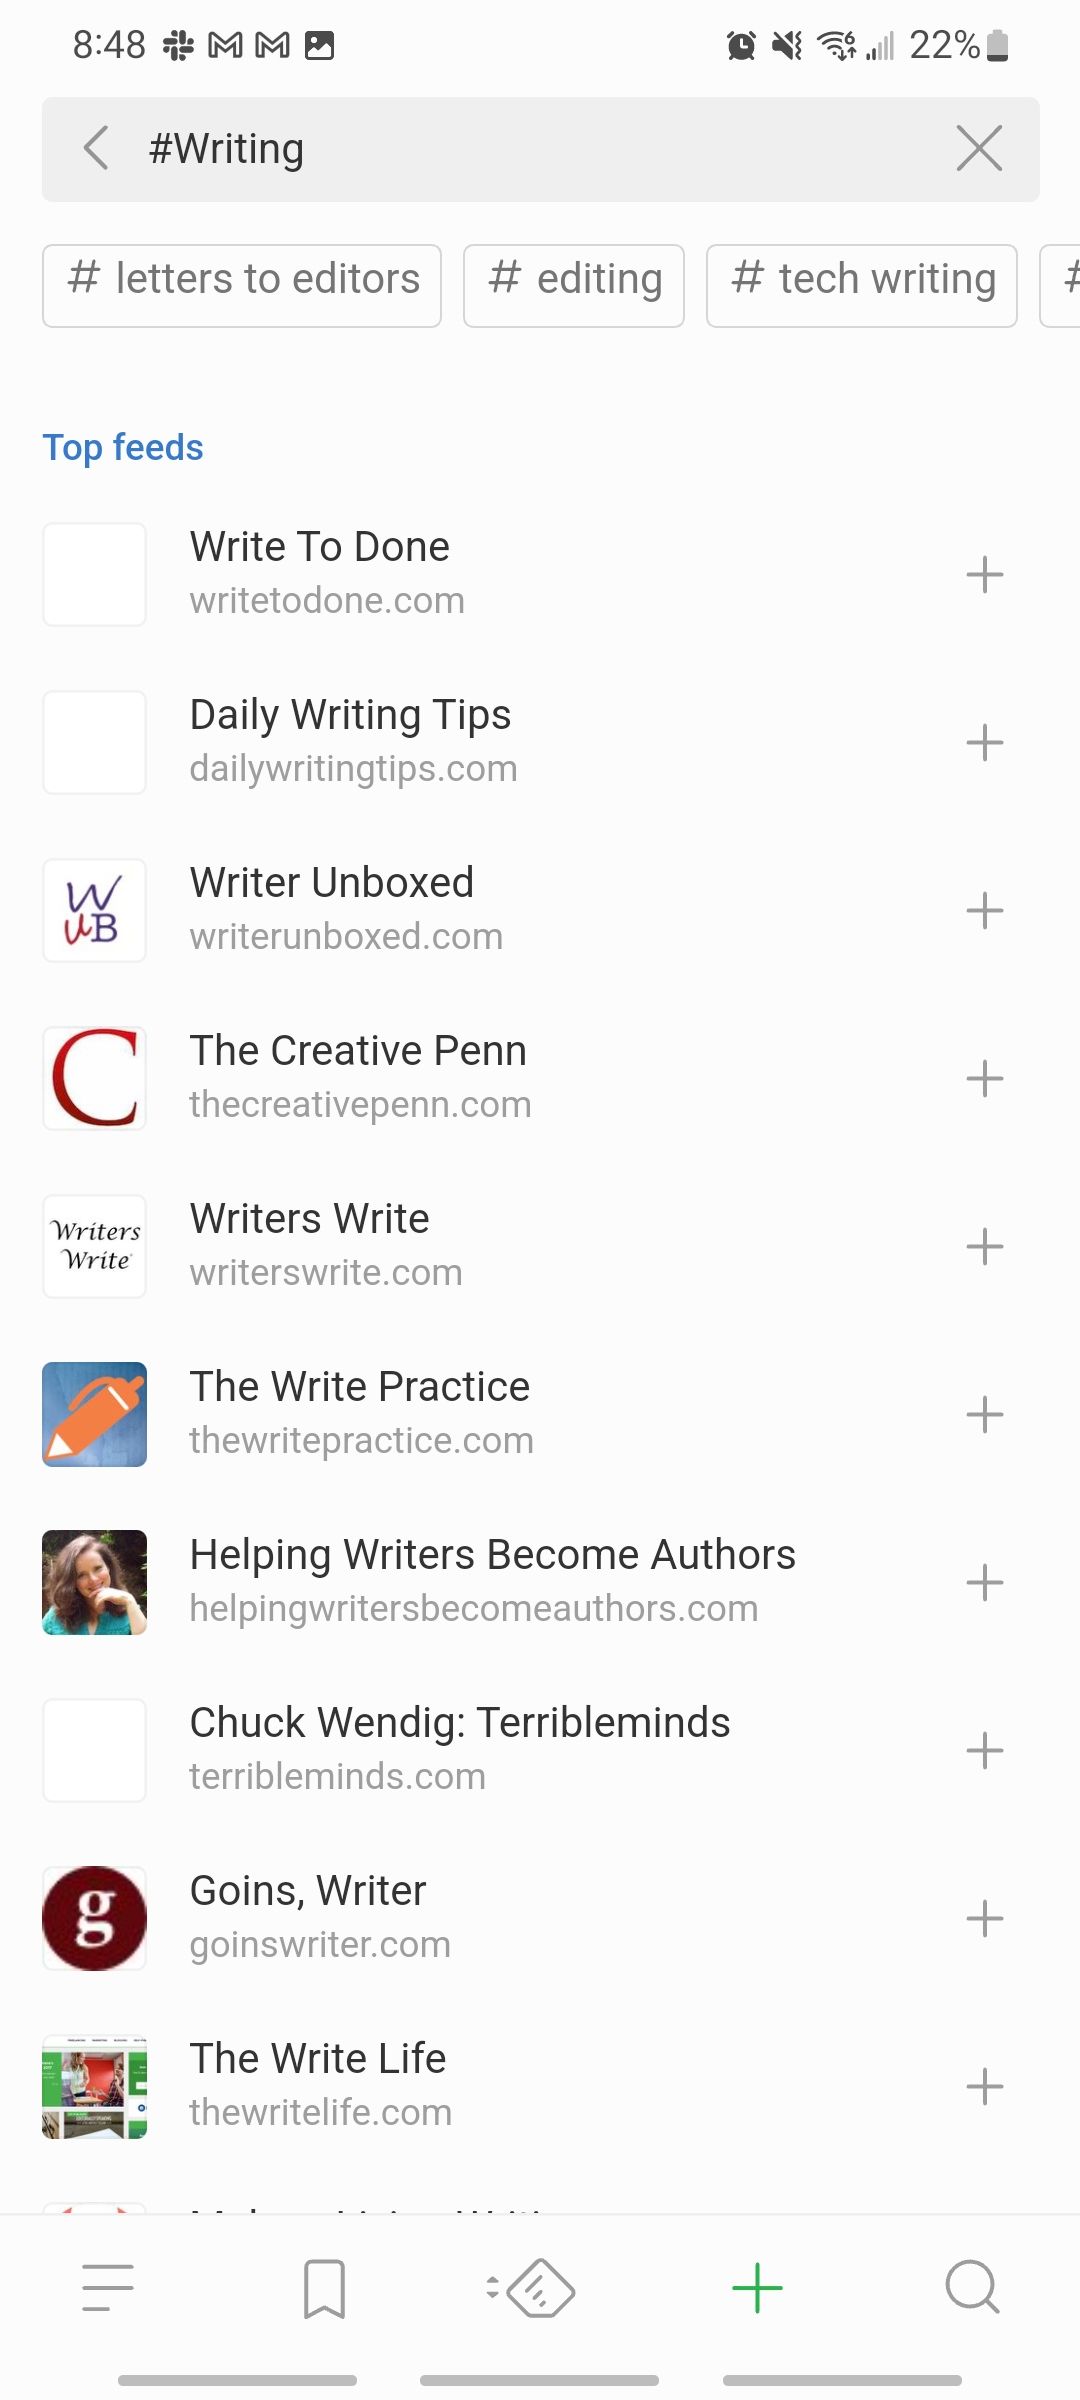 feedly app showing the writing section